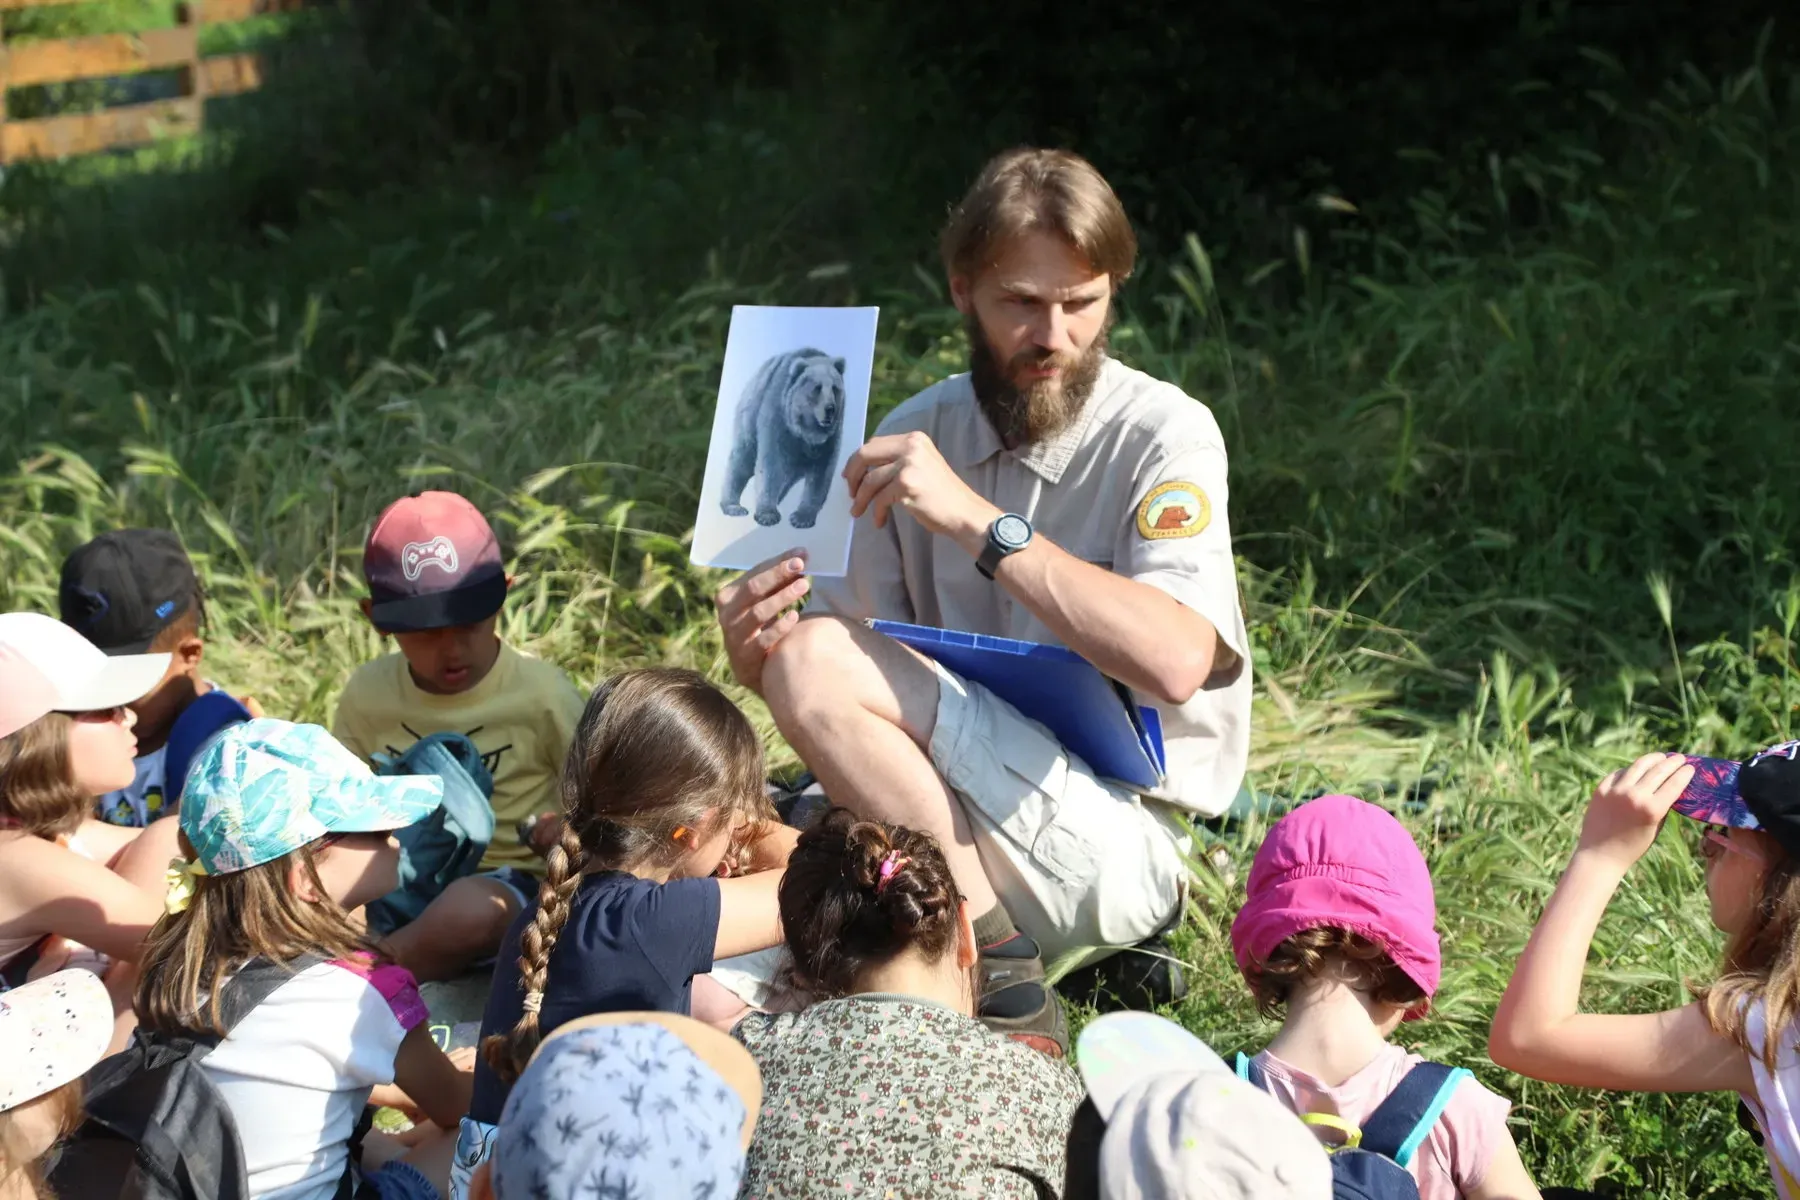 An adult holding up a picture of a bear to a group of children in an outdoor setting